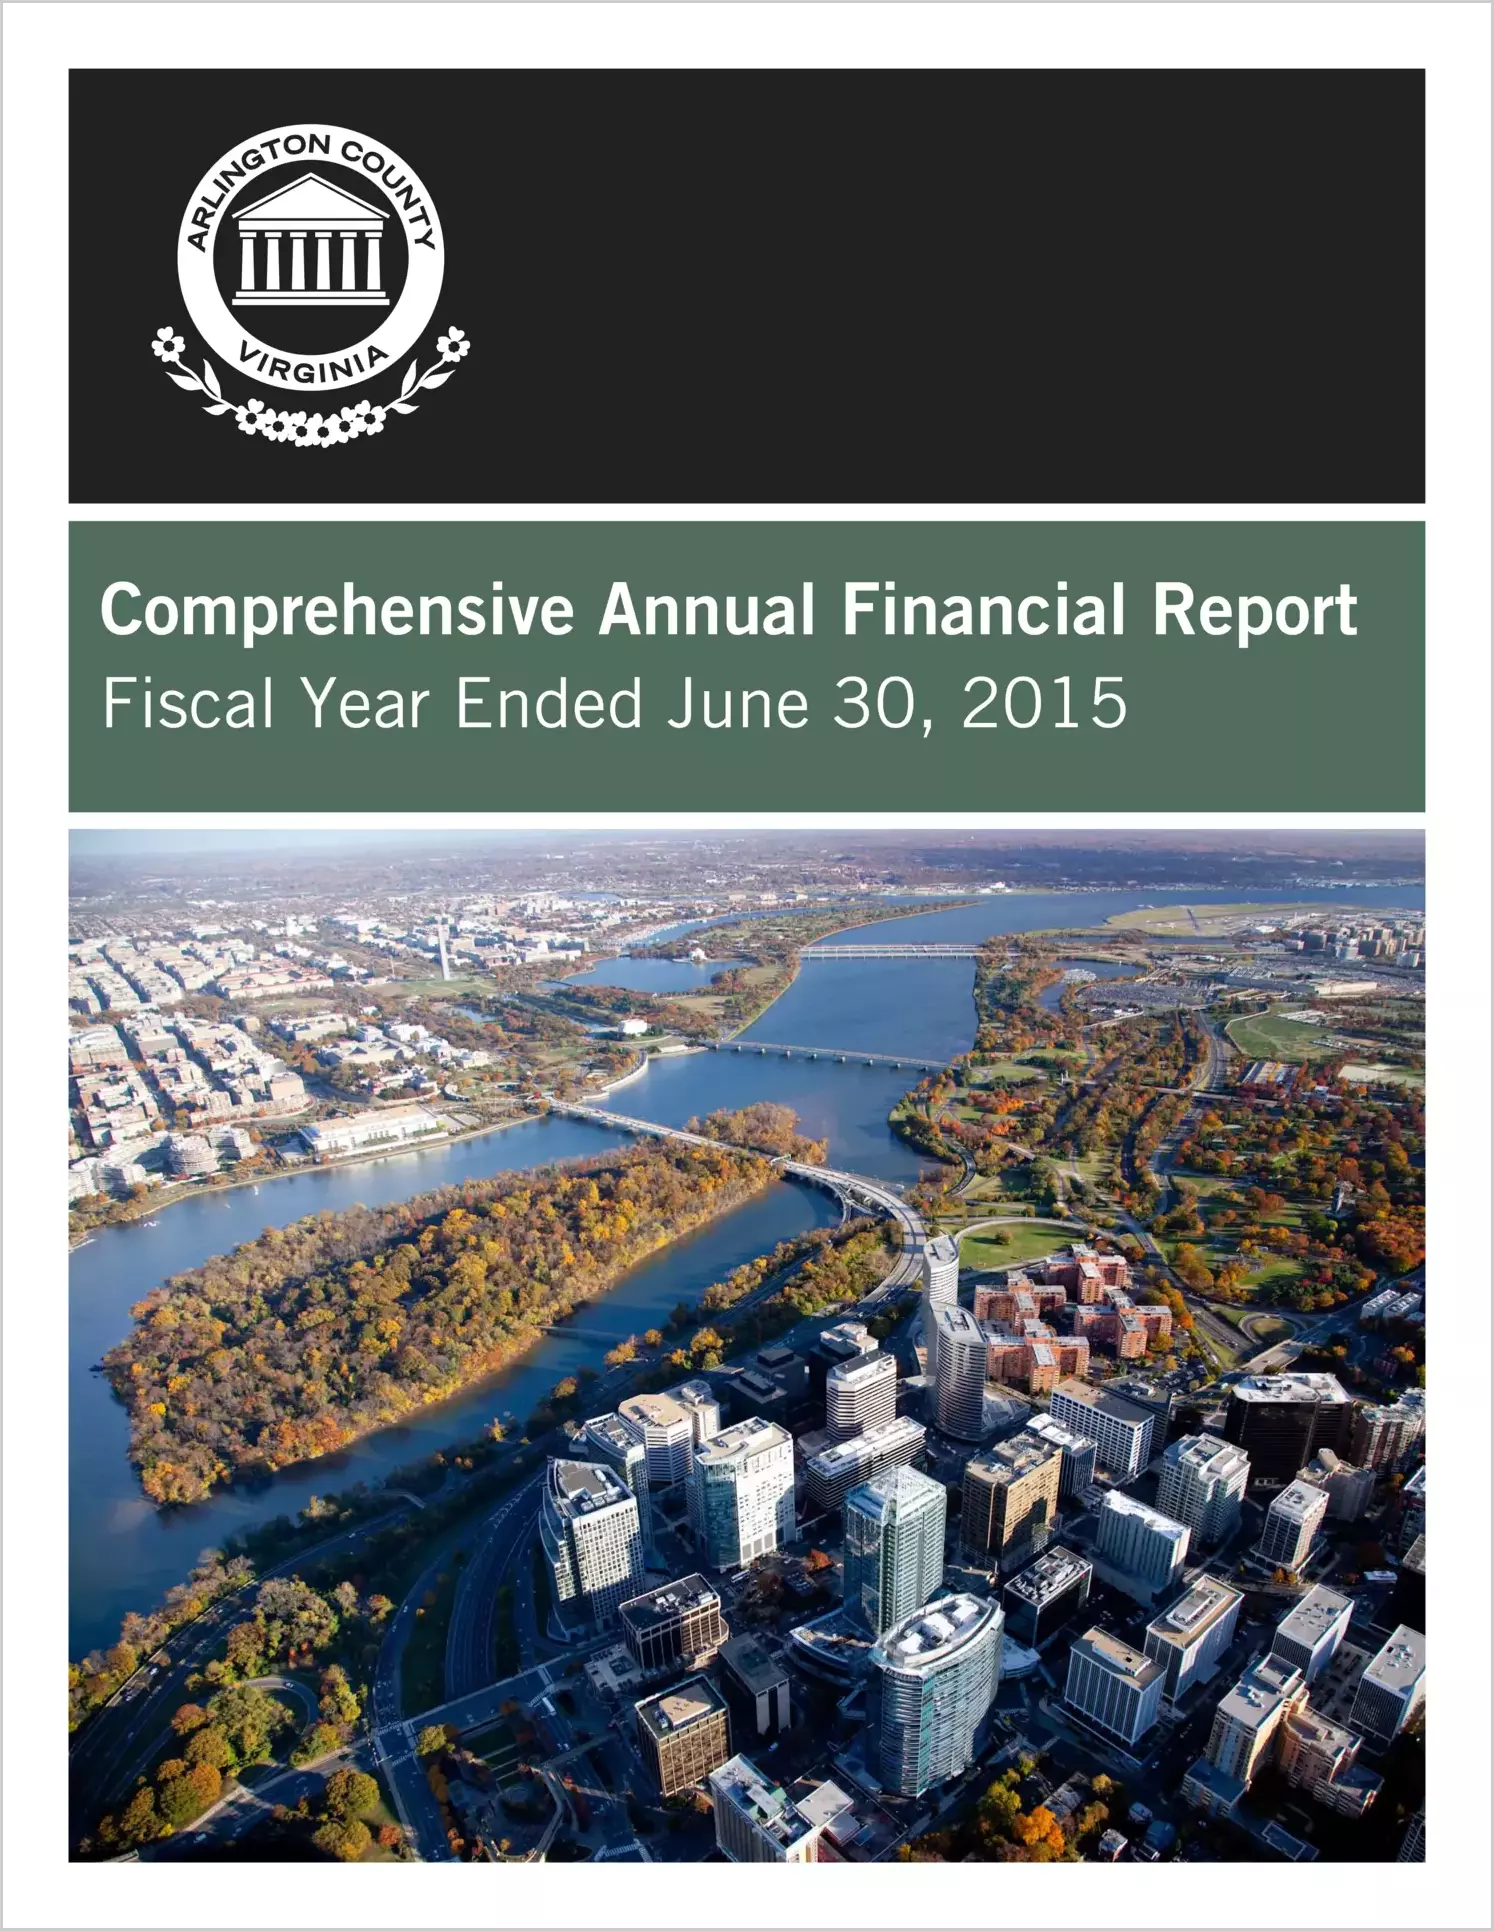 2015 Annual Financial Report for County of Arlington